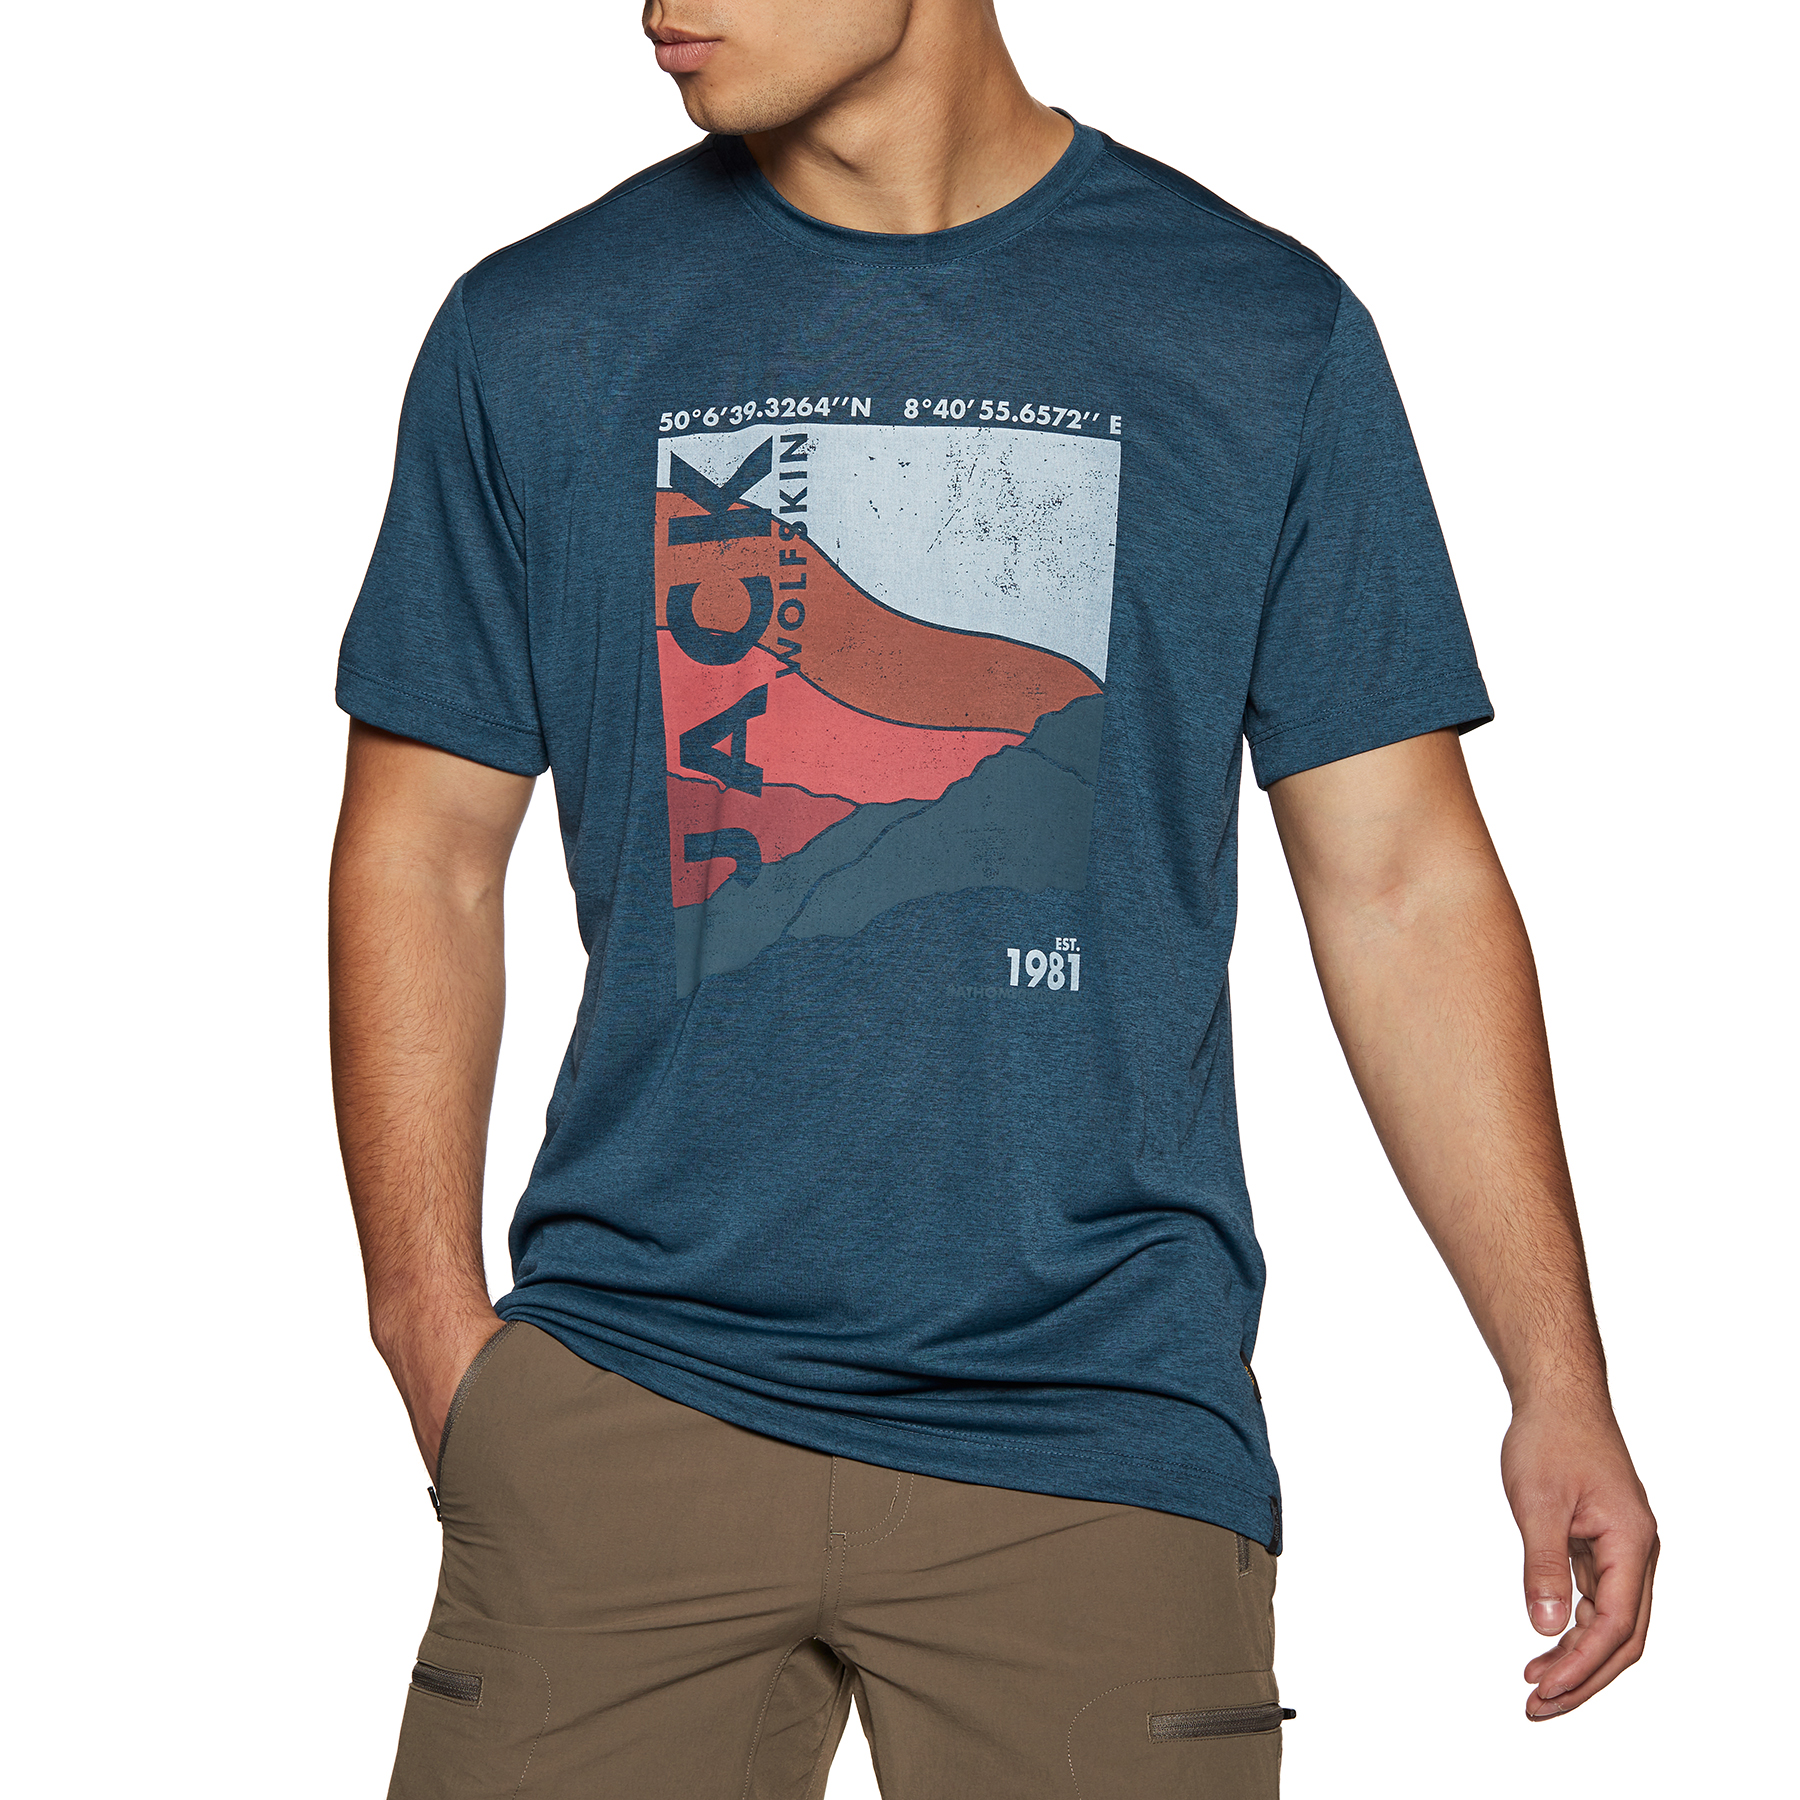 Get Free T-Shirt Delivery Affordable Crosstrail at Jack Sleeve Graphic Short Wolfskin Prices